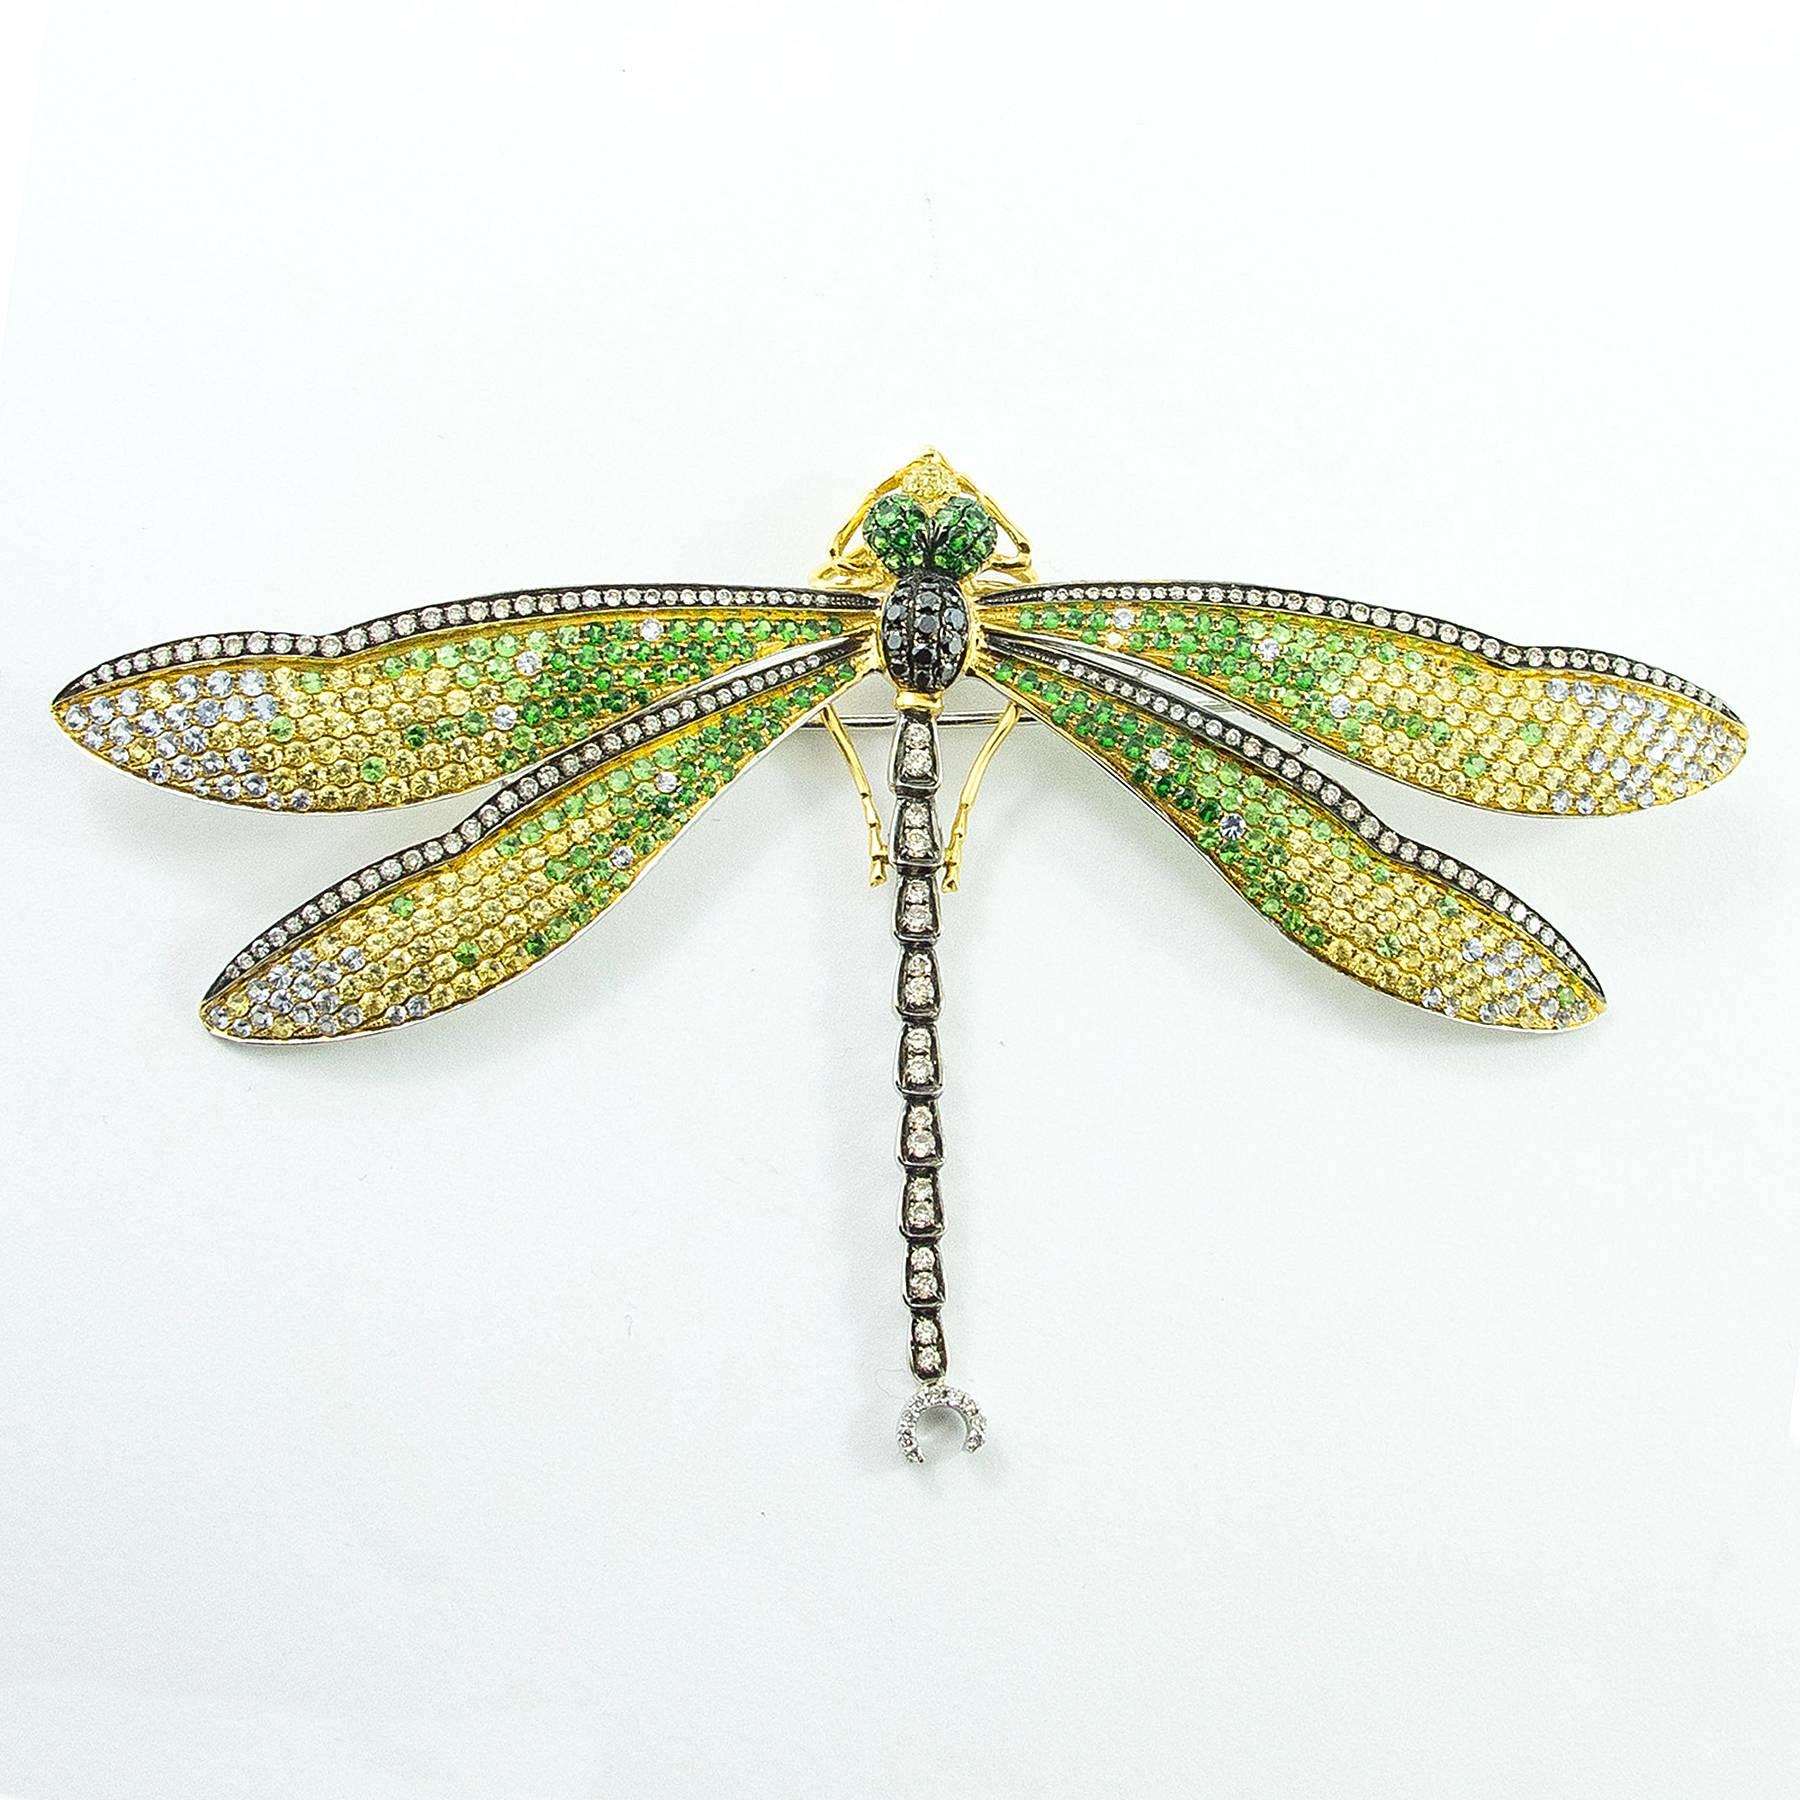 A large and exquisite Diamond, Sapphire and Tsavorite Garnet Dragonfly brooch is pave and bead set with 638 clear and colored Diamonds, multi colored Sapphires, Corundums and Tsavorite Garnets in a hand assembled 18K gold mount. 

The brooch